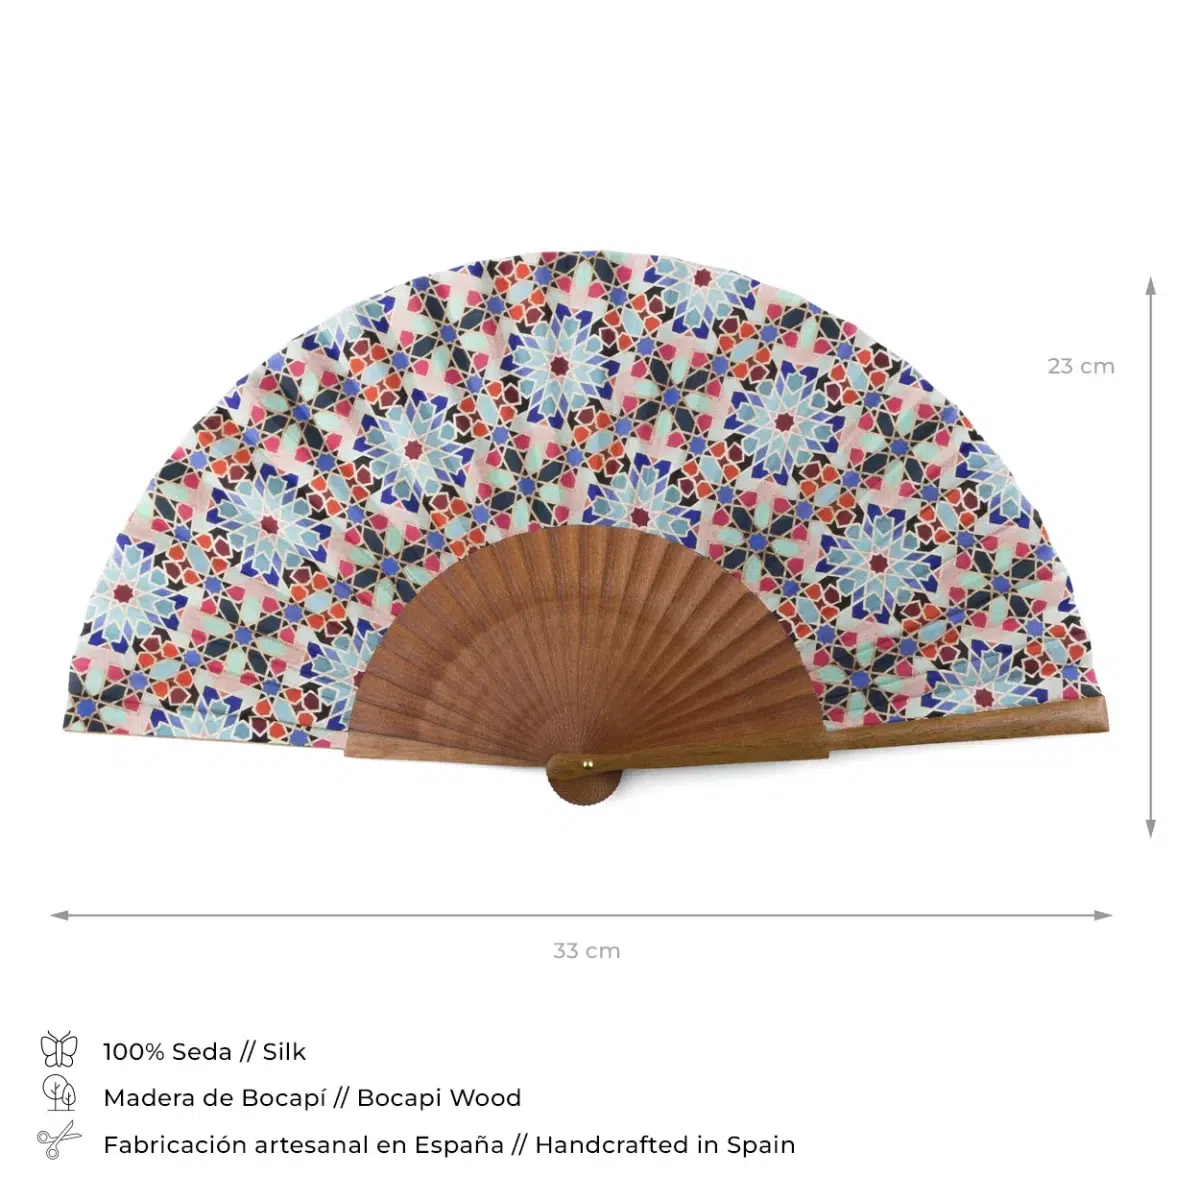 Silk Fan with Composition Details, Manufacturing, and Measurements.